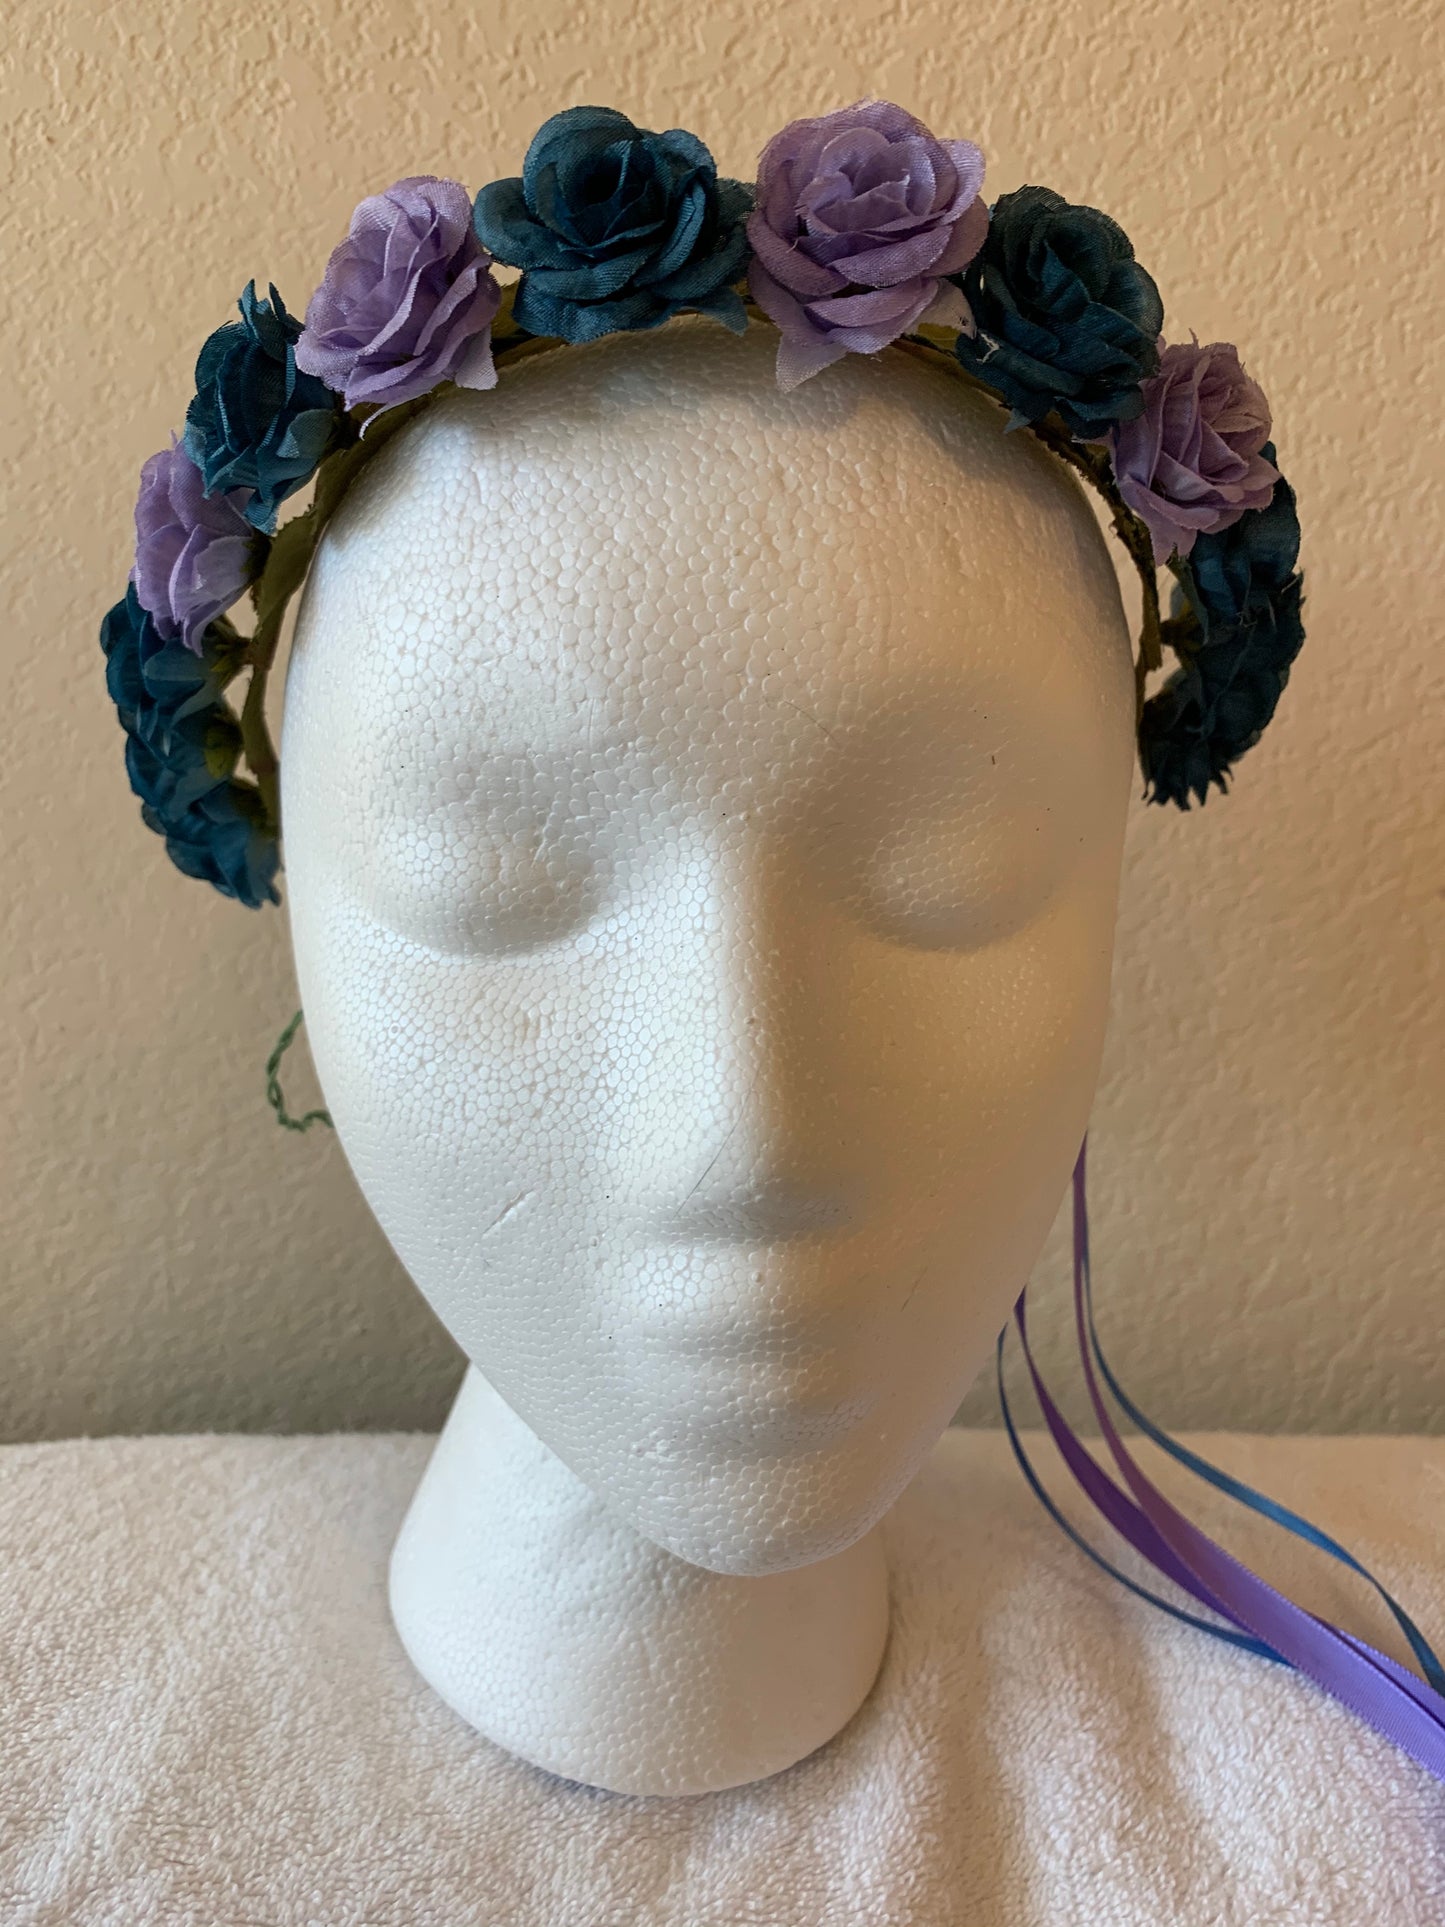 Extra Small Wreath - Purple and Dusty Blue Roses